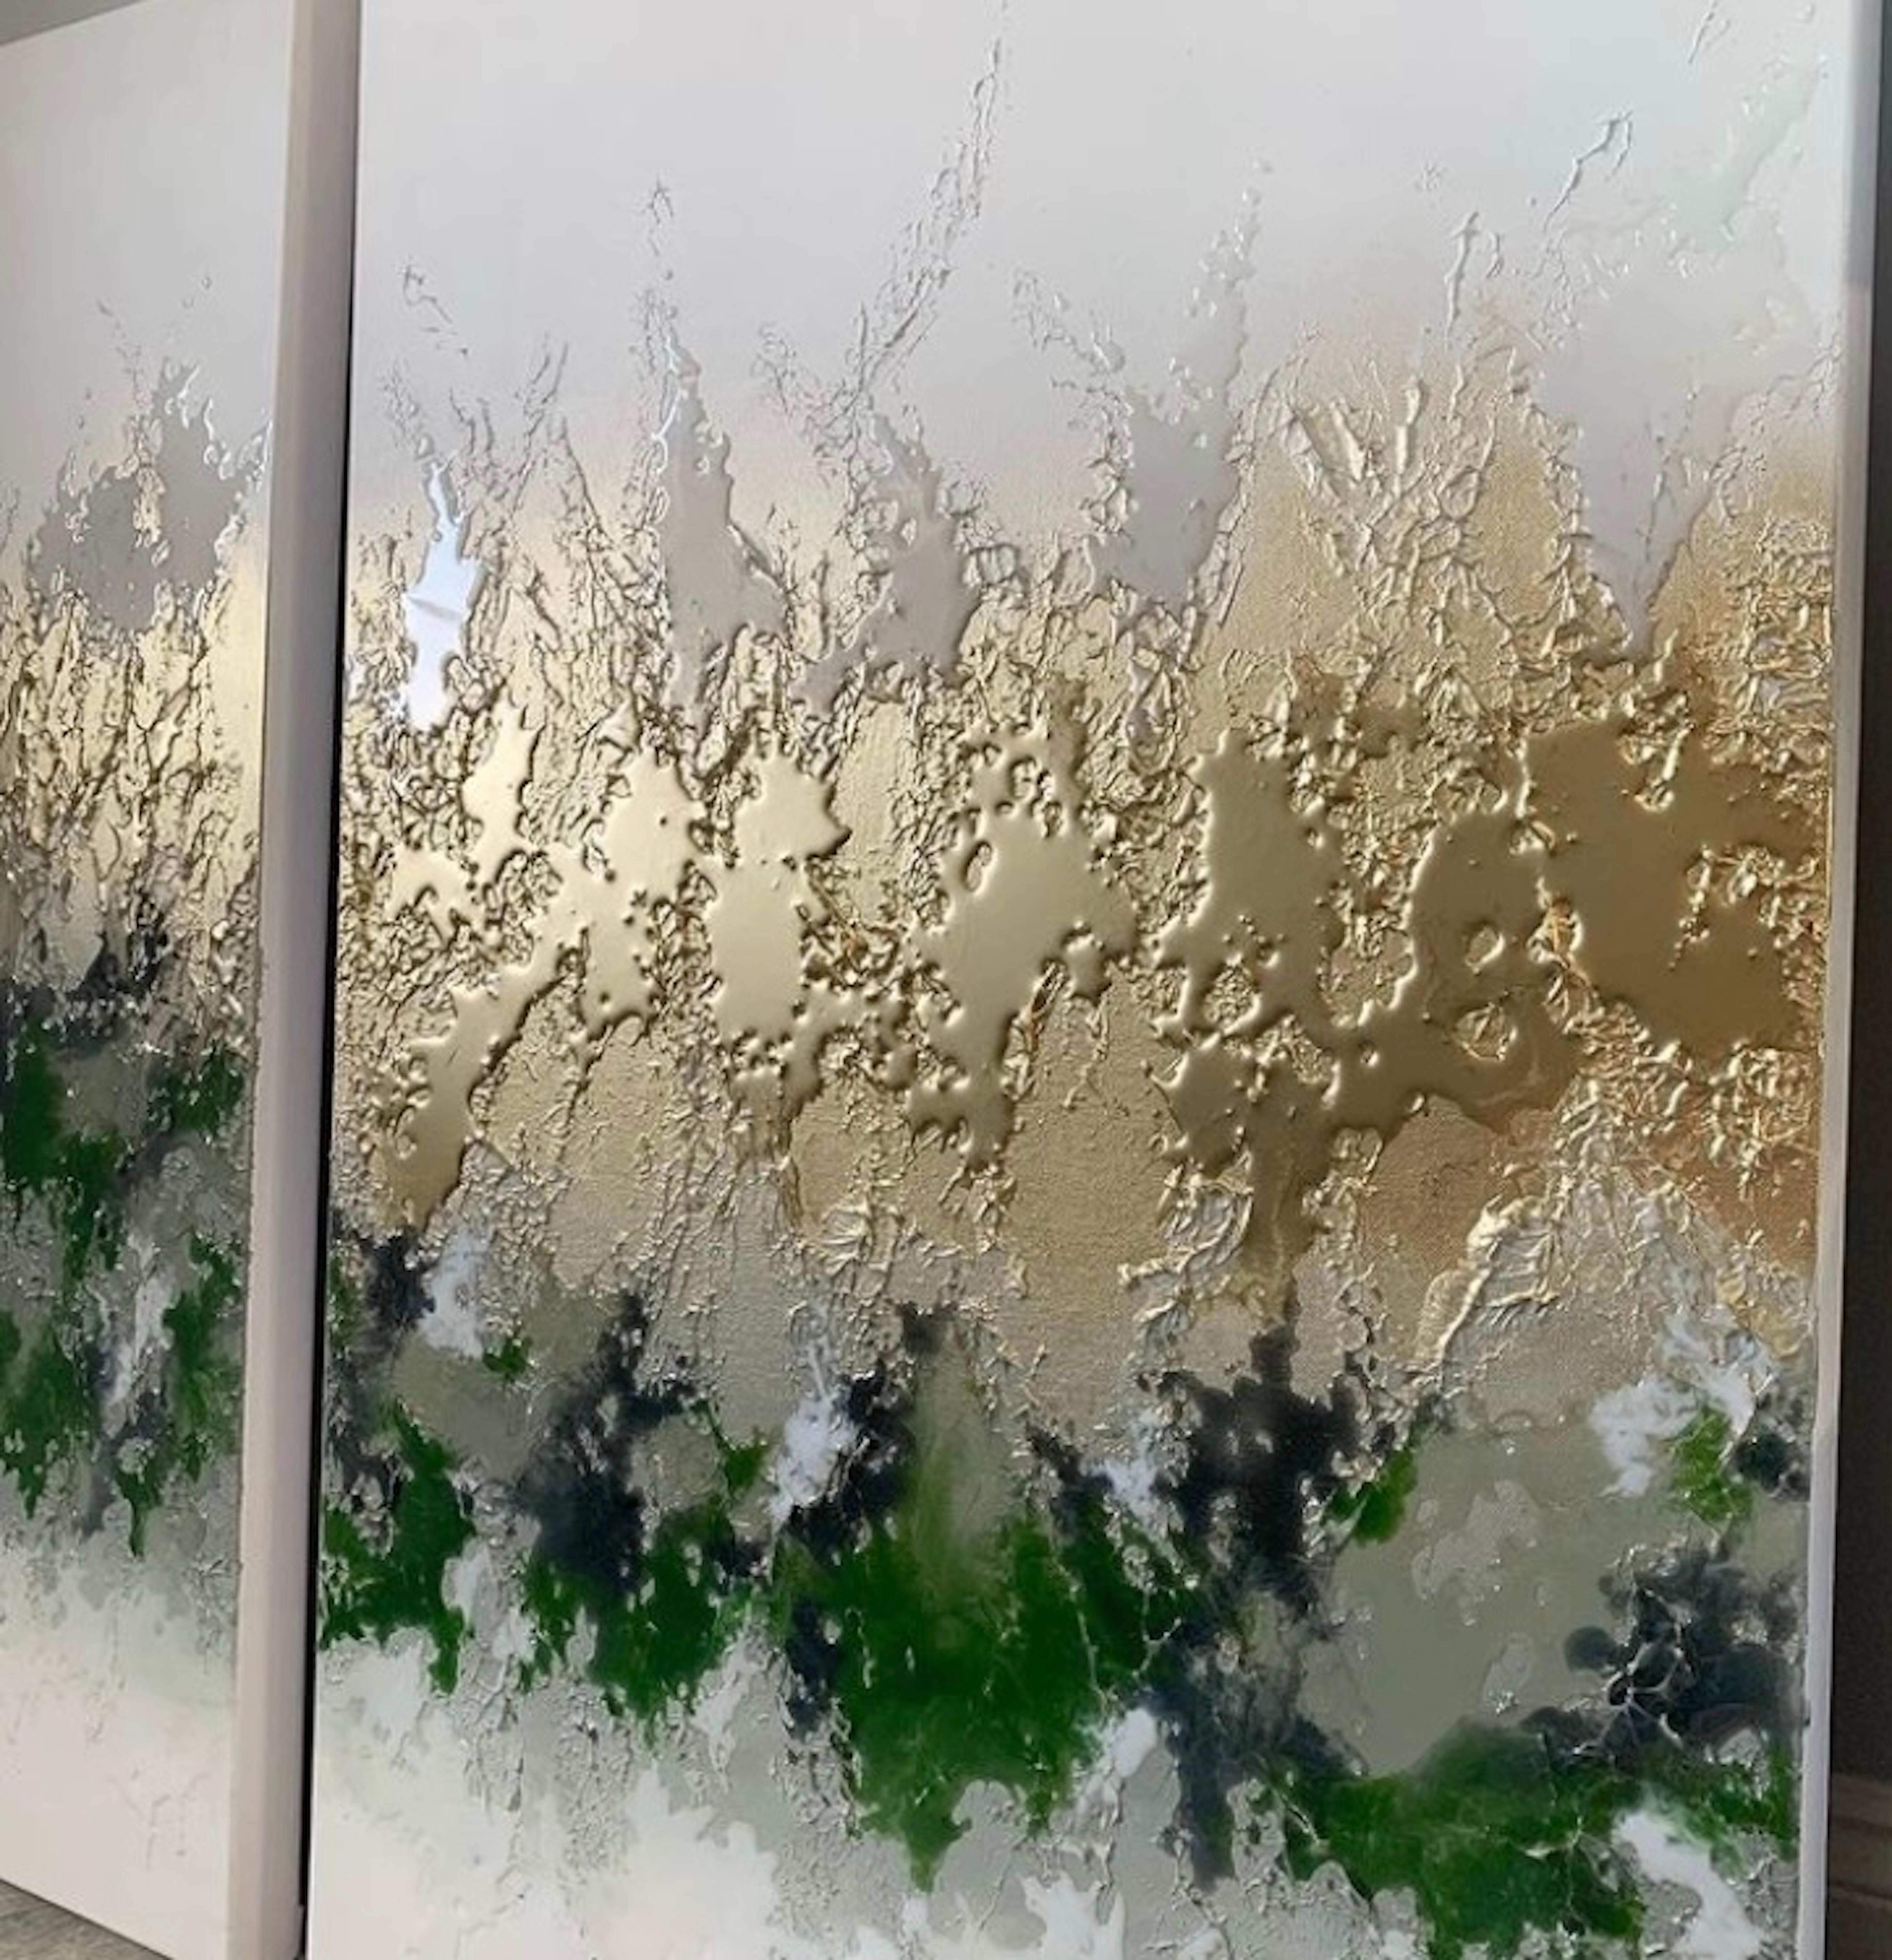  These original artwork sets are full of deep textures created by using artist clay, radiant with metallic gold ink highlights within glossy resin. 

Additional information:
Mixed Media on Canvas
90 H x 60 W x 3.7 D cm (35.43 x 23.62 x 1.46 in)
Sold